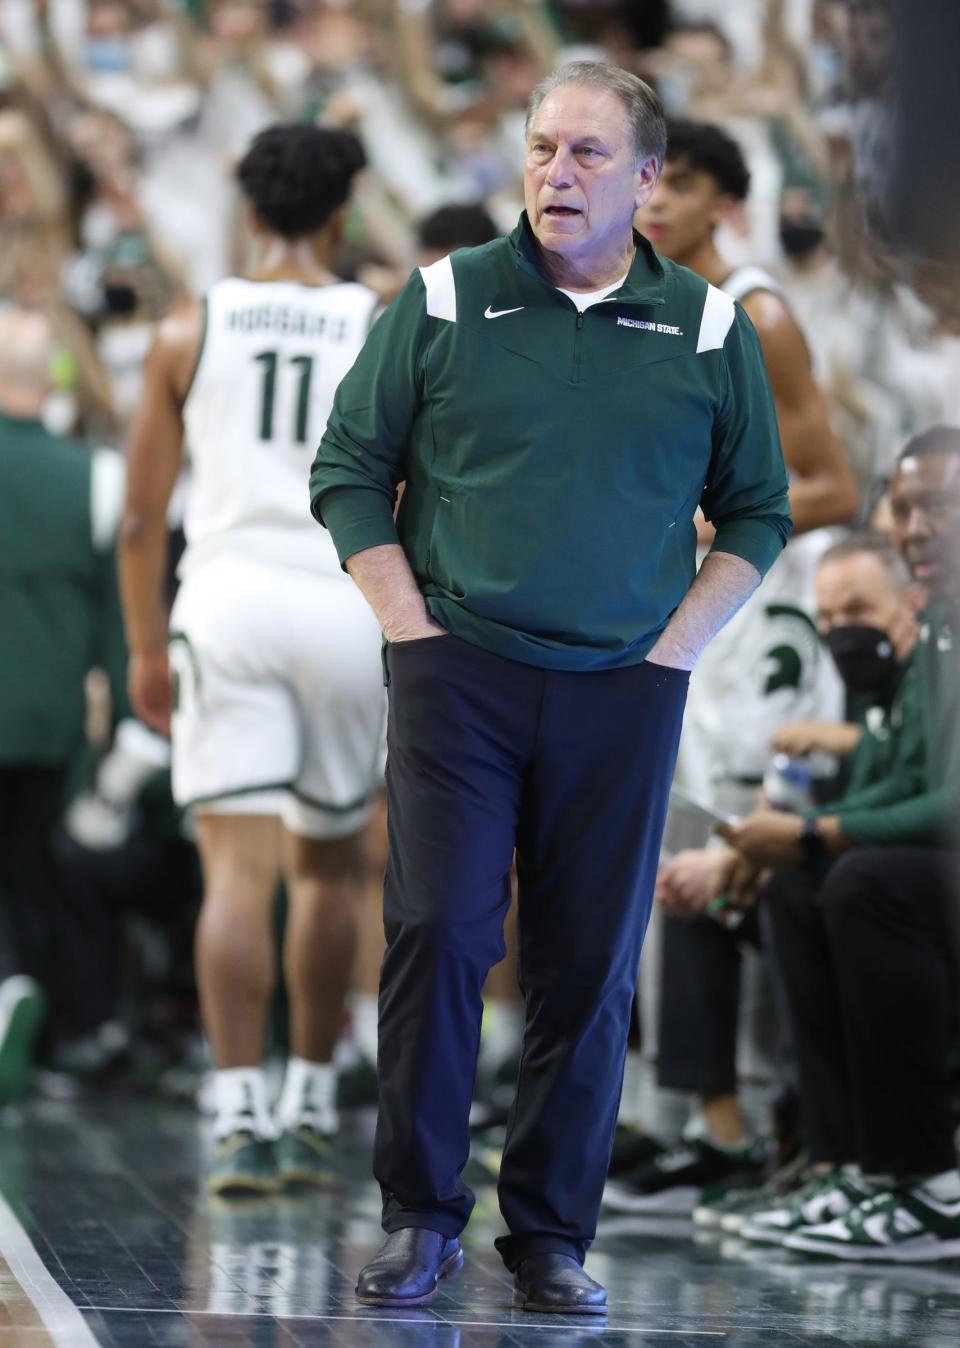 Michigan State coach Tom Izzo on the bench during MSU's 70-62 loss on Tuesday, Feb. 8, 2022, at the Breslin Center.